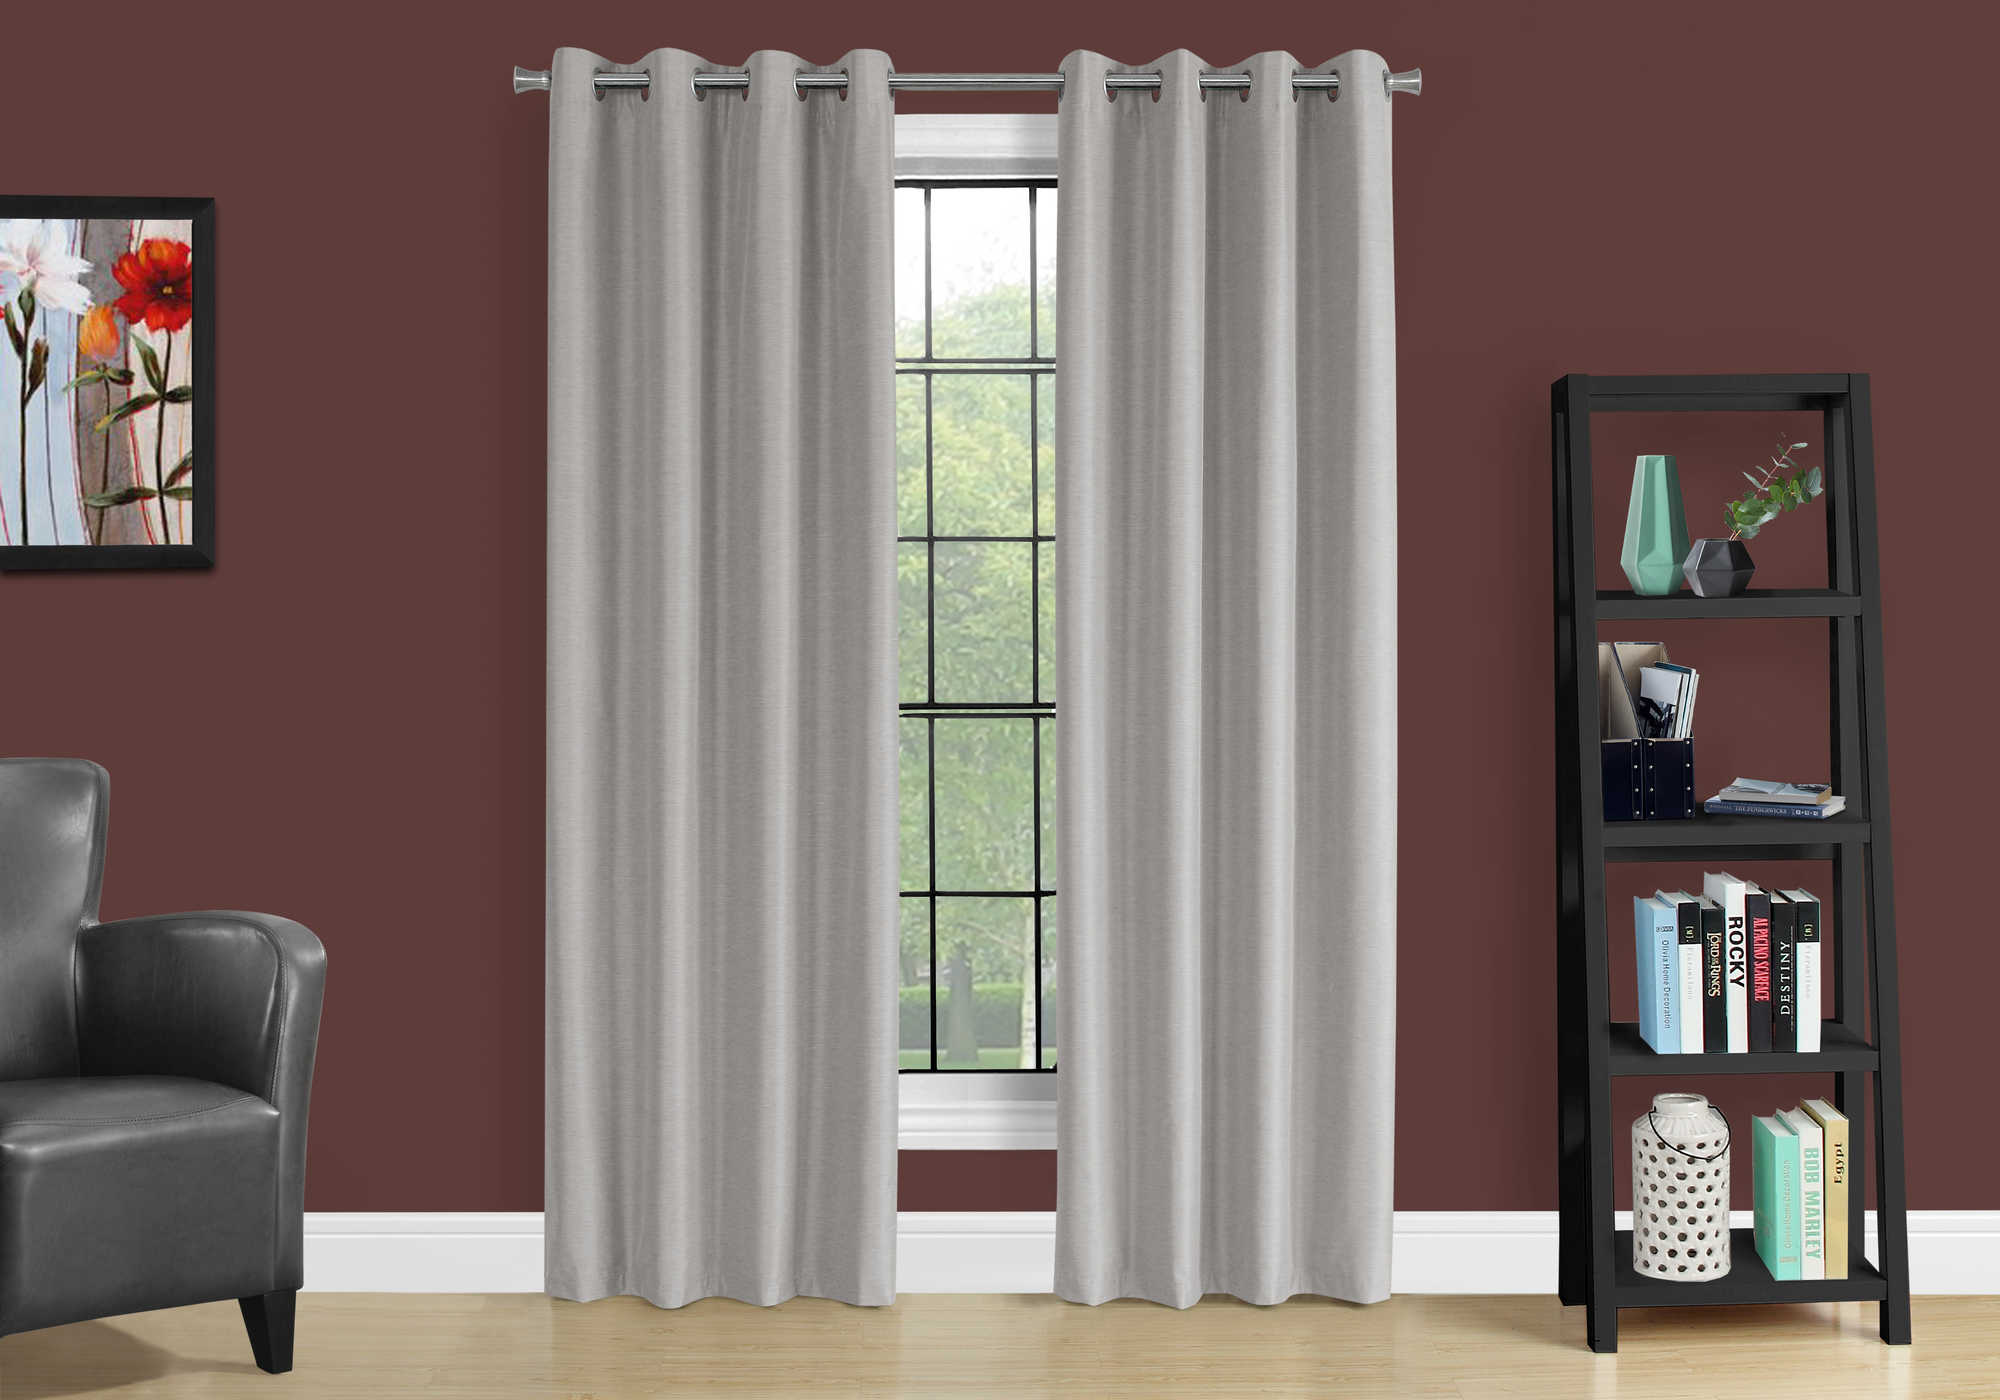 CURTAIN PANEL - 2PCS / 52"W X 95"H SILVER SOLID BLACKOUT